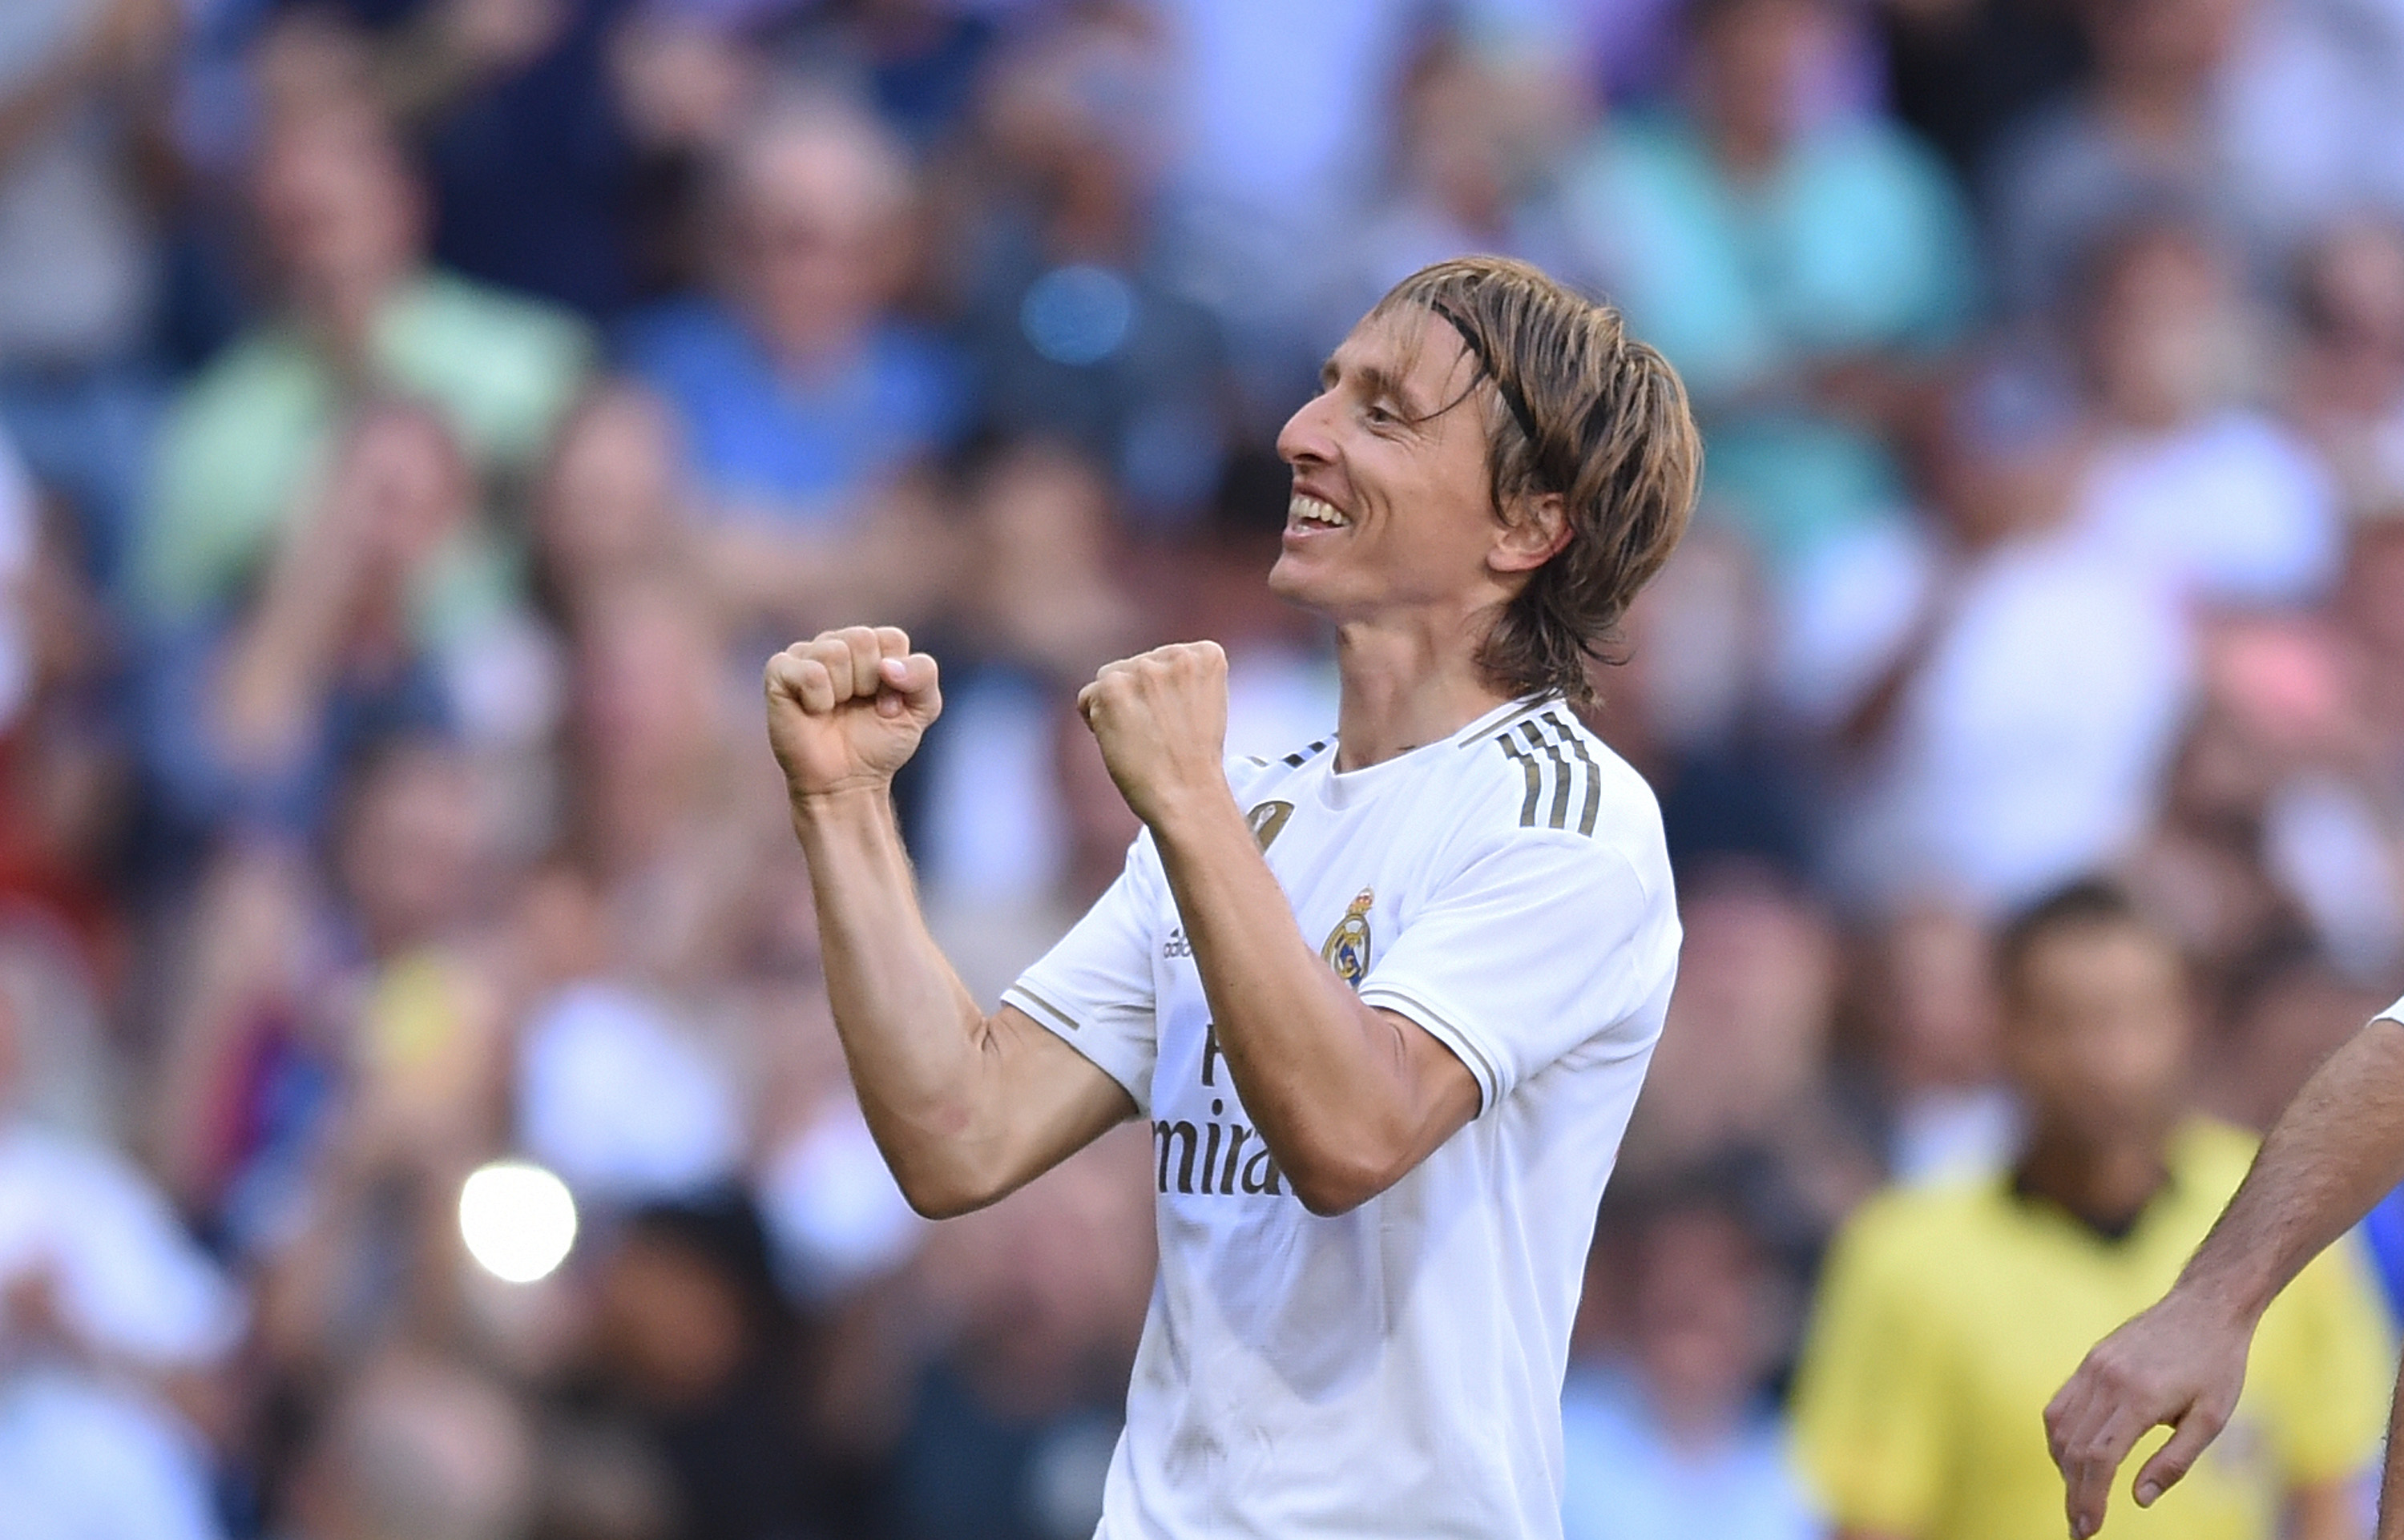 MADRID, SPAIN - OCTOBER 05: Luka Modric of Real Madrid celebrates after scoring Real's 3rd goal during the Liga match between Real Madrid CF and Granada CF at Estadio Santiago Bernabeu on October 05, 2019 in Madrid, Spain. (Photo by Denis Doyle/Getty Images)